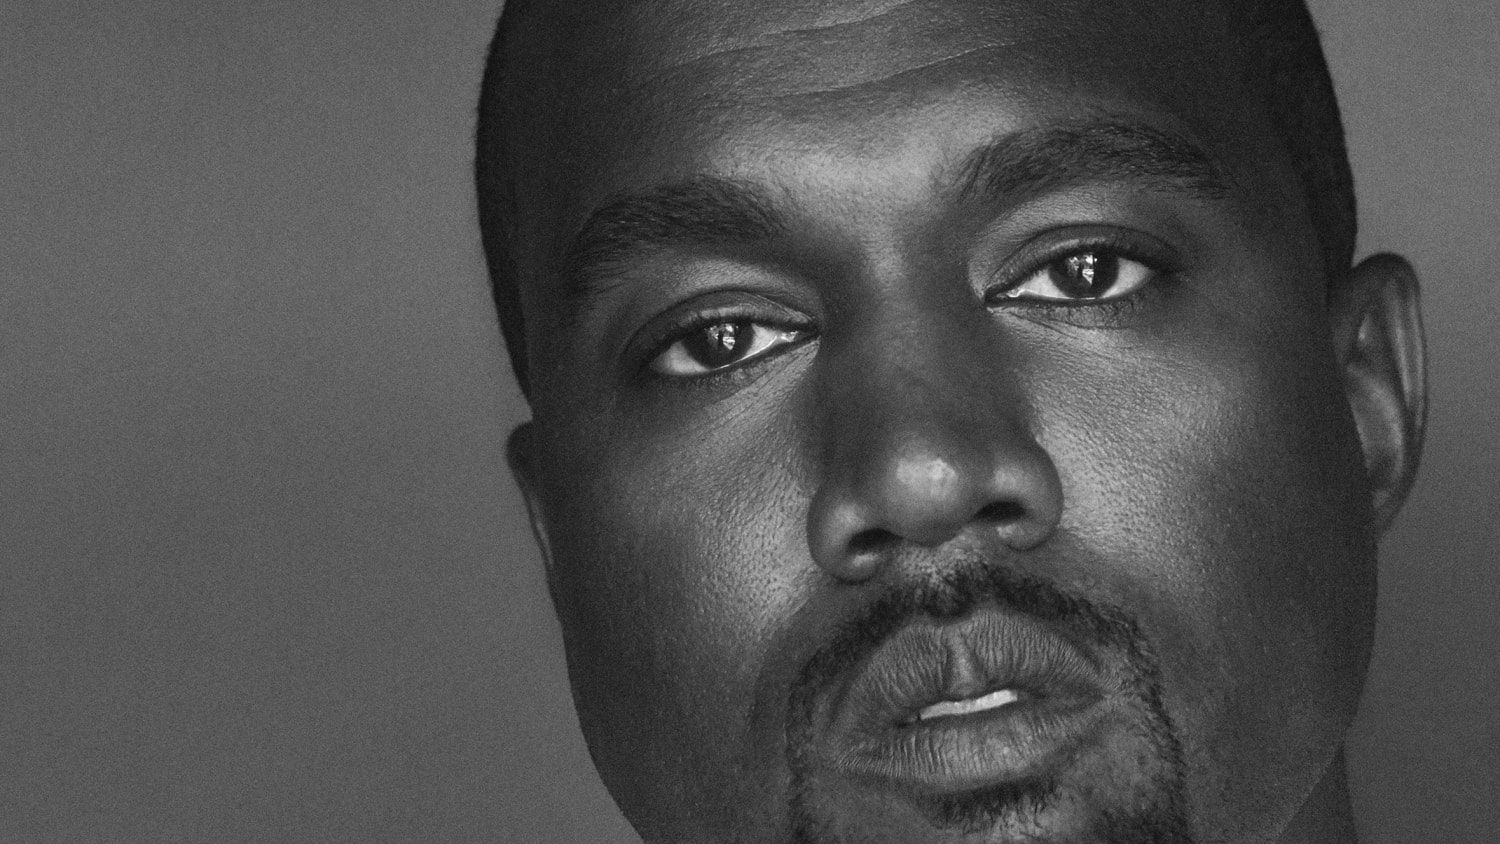 Kanye West announces he's running for president in 2020; Mark Cuban, Elon Musk tweet support